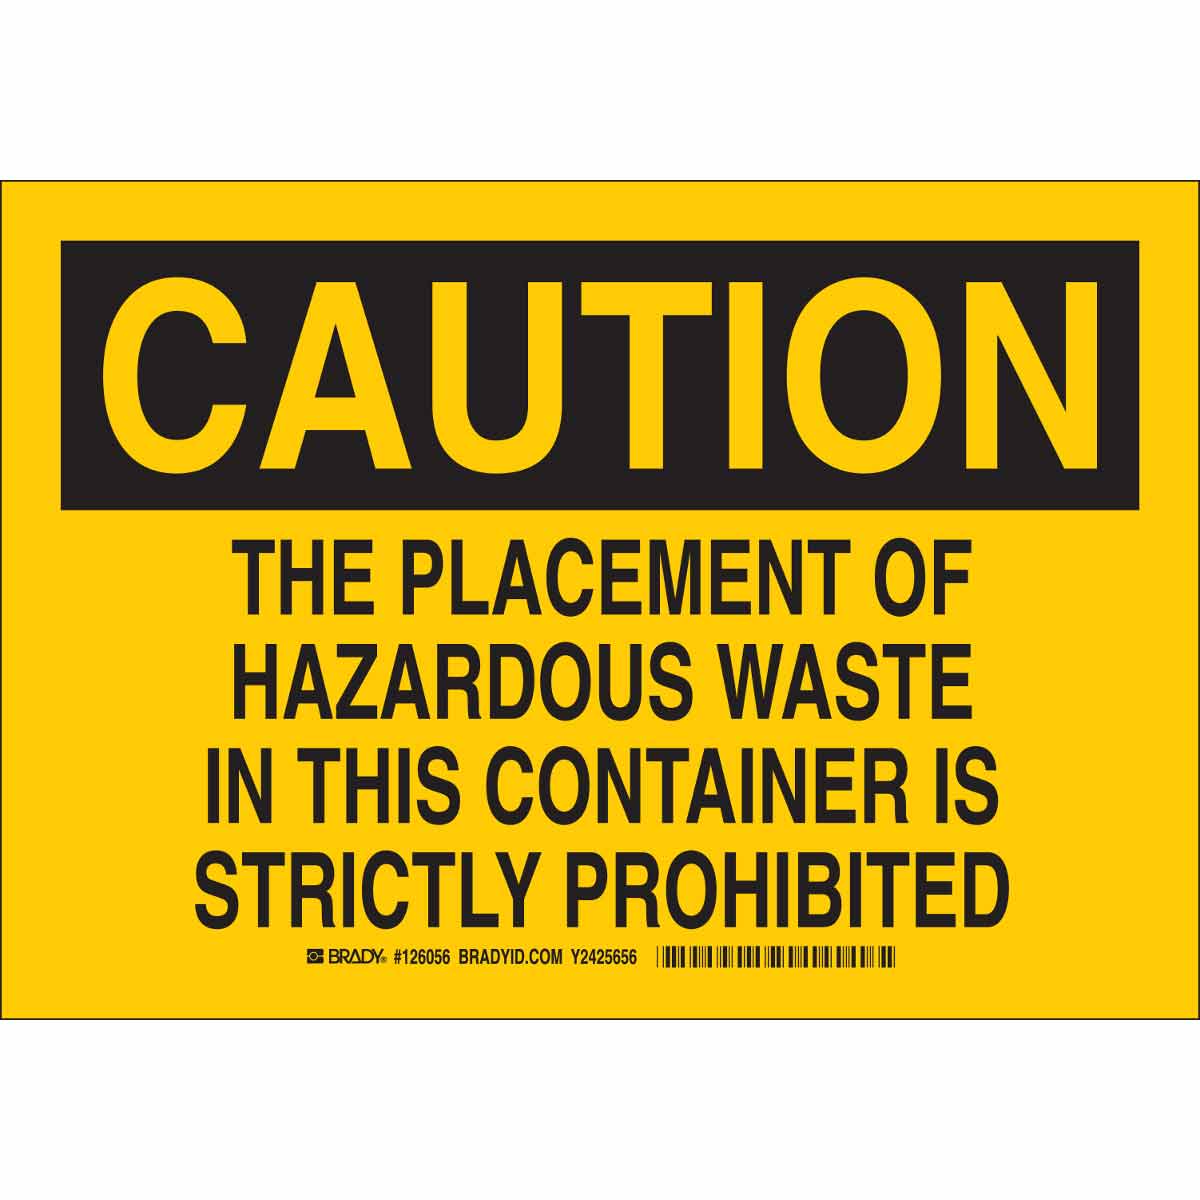 Brady 126059 Chemical Hazard Sign 14 Width Black on Yellow 10 Height LegendThe Placement of Hazardous Waste in This Container is Strictly Prohibited 